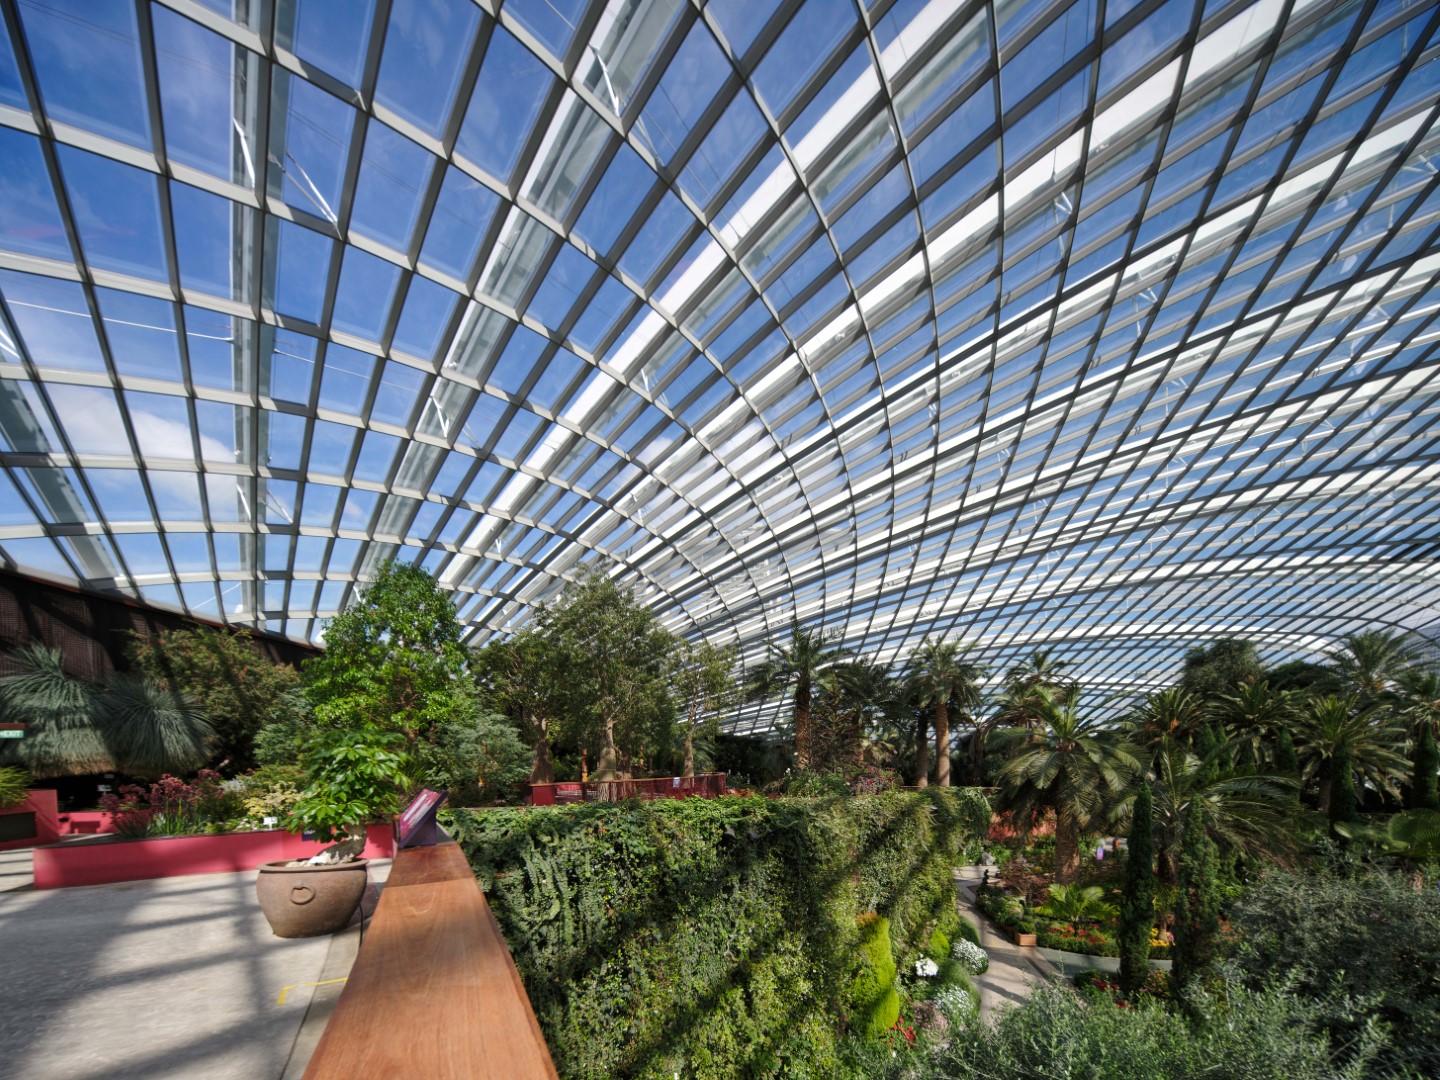 Interior of Flower Dome, Gardens by the Bay